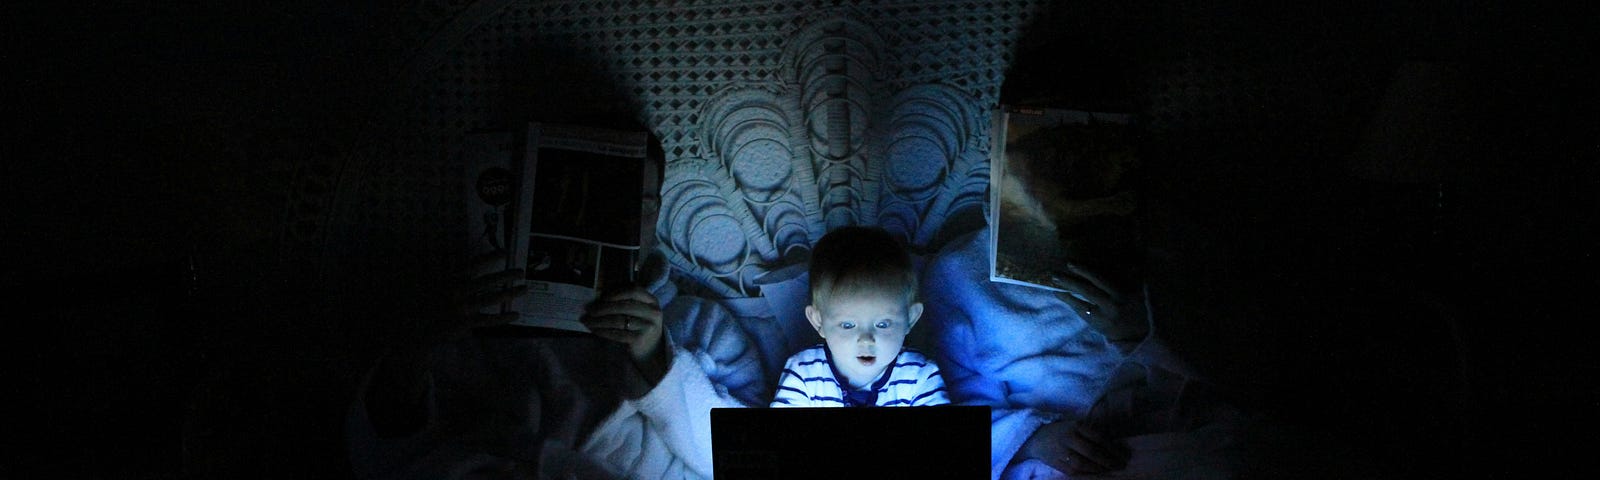 Kid in front of a screen during the night